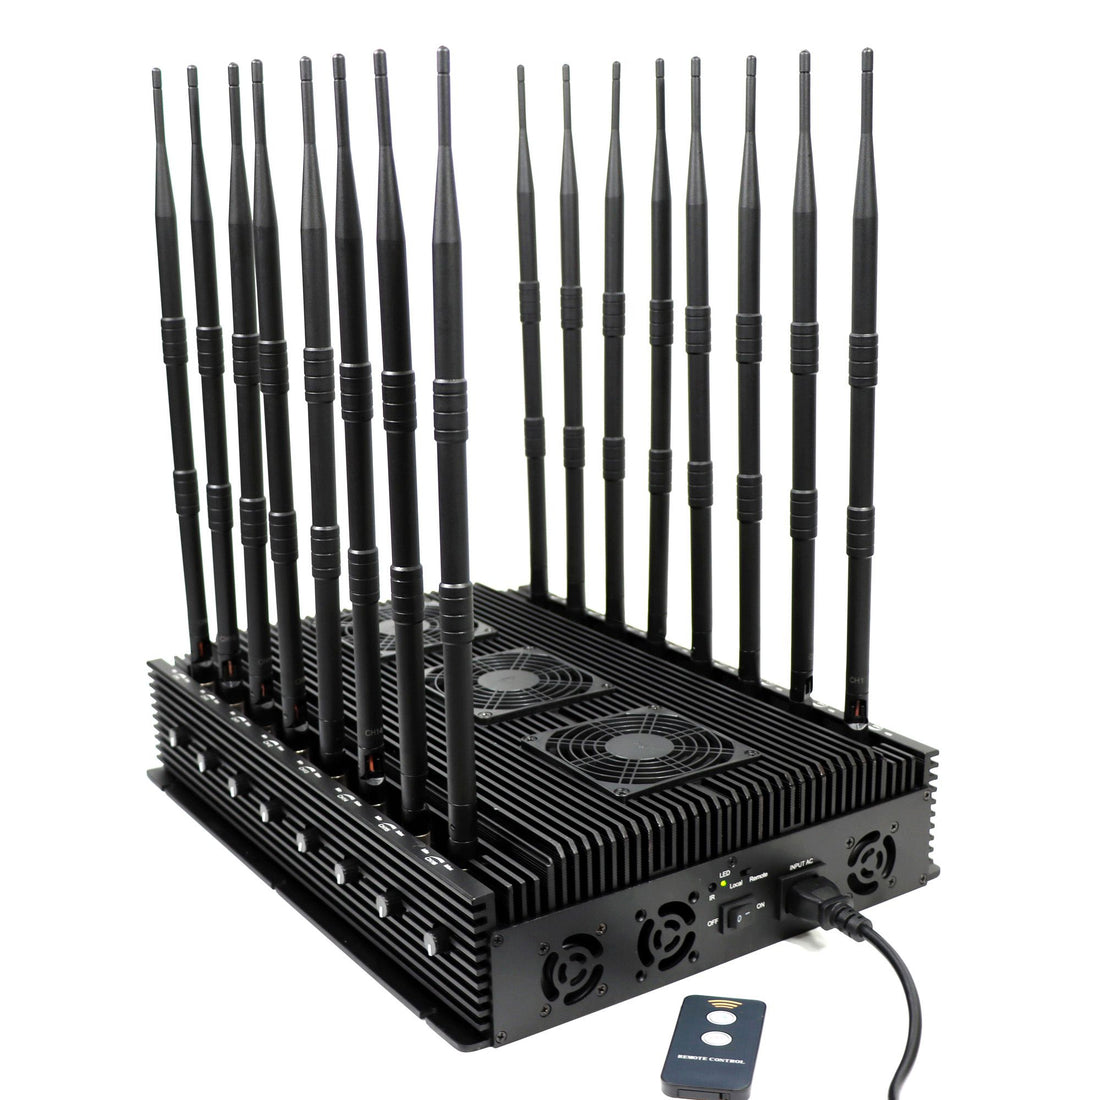 Can a full-band jammer block 5G?